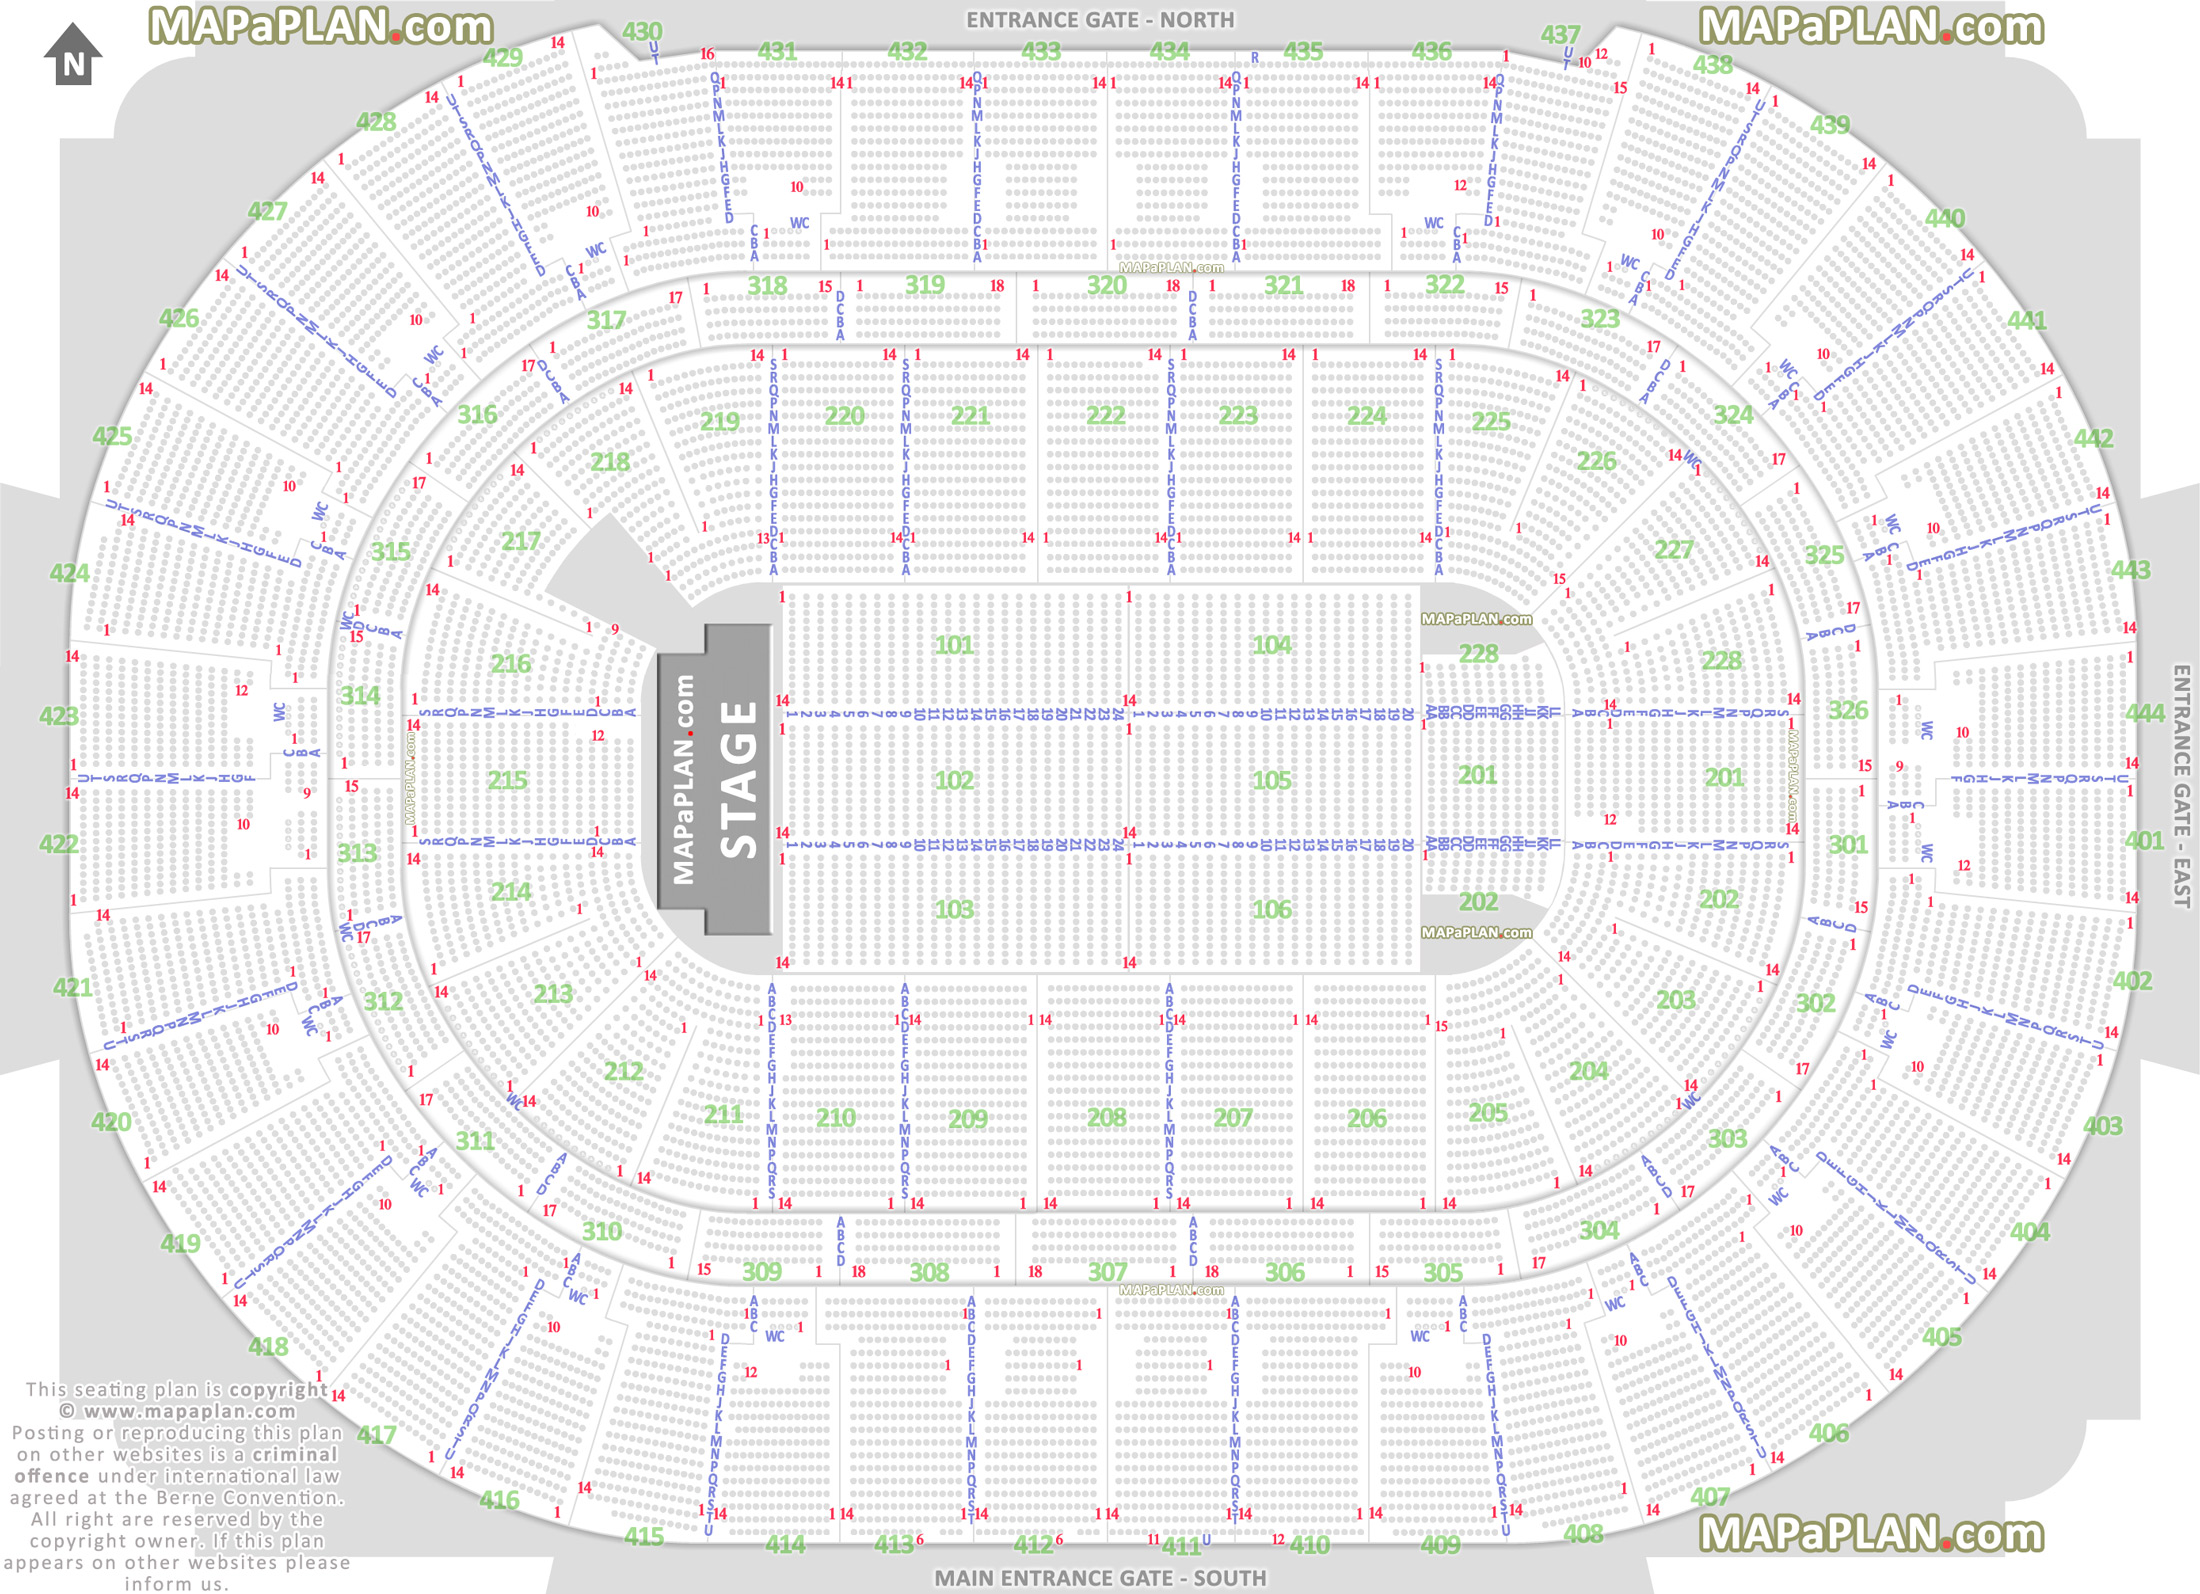 Honda Center Concert Seating With Rows Elcho Table